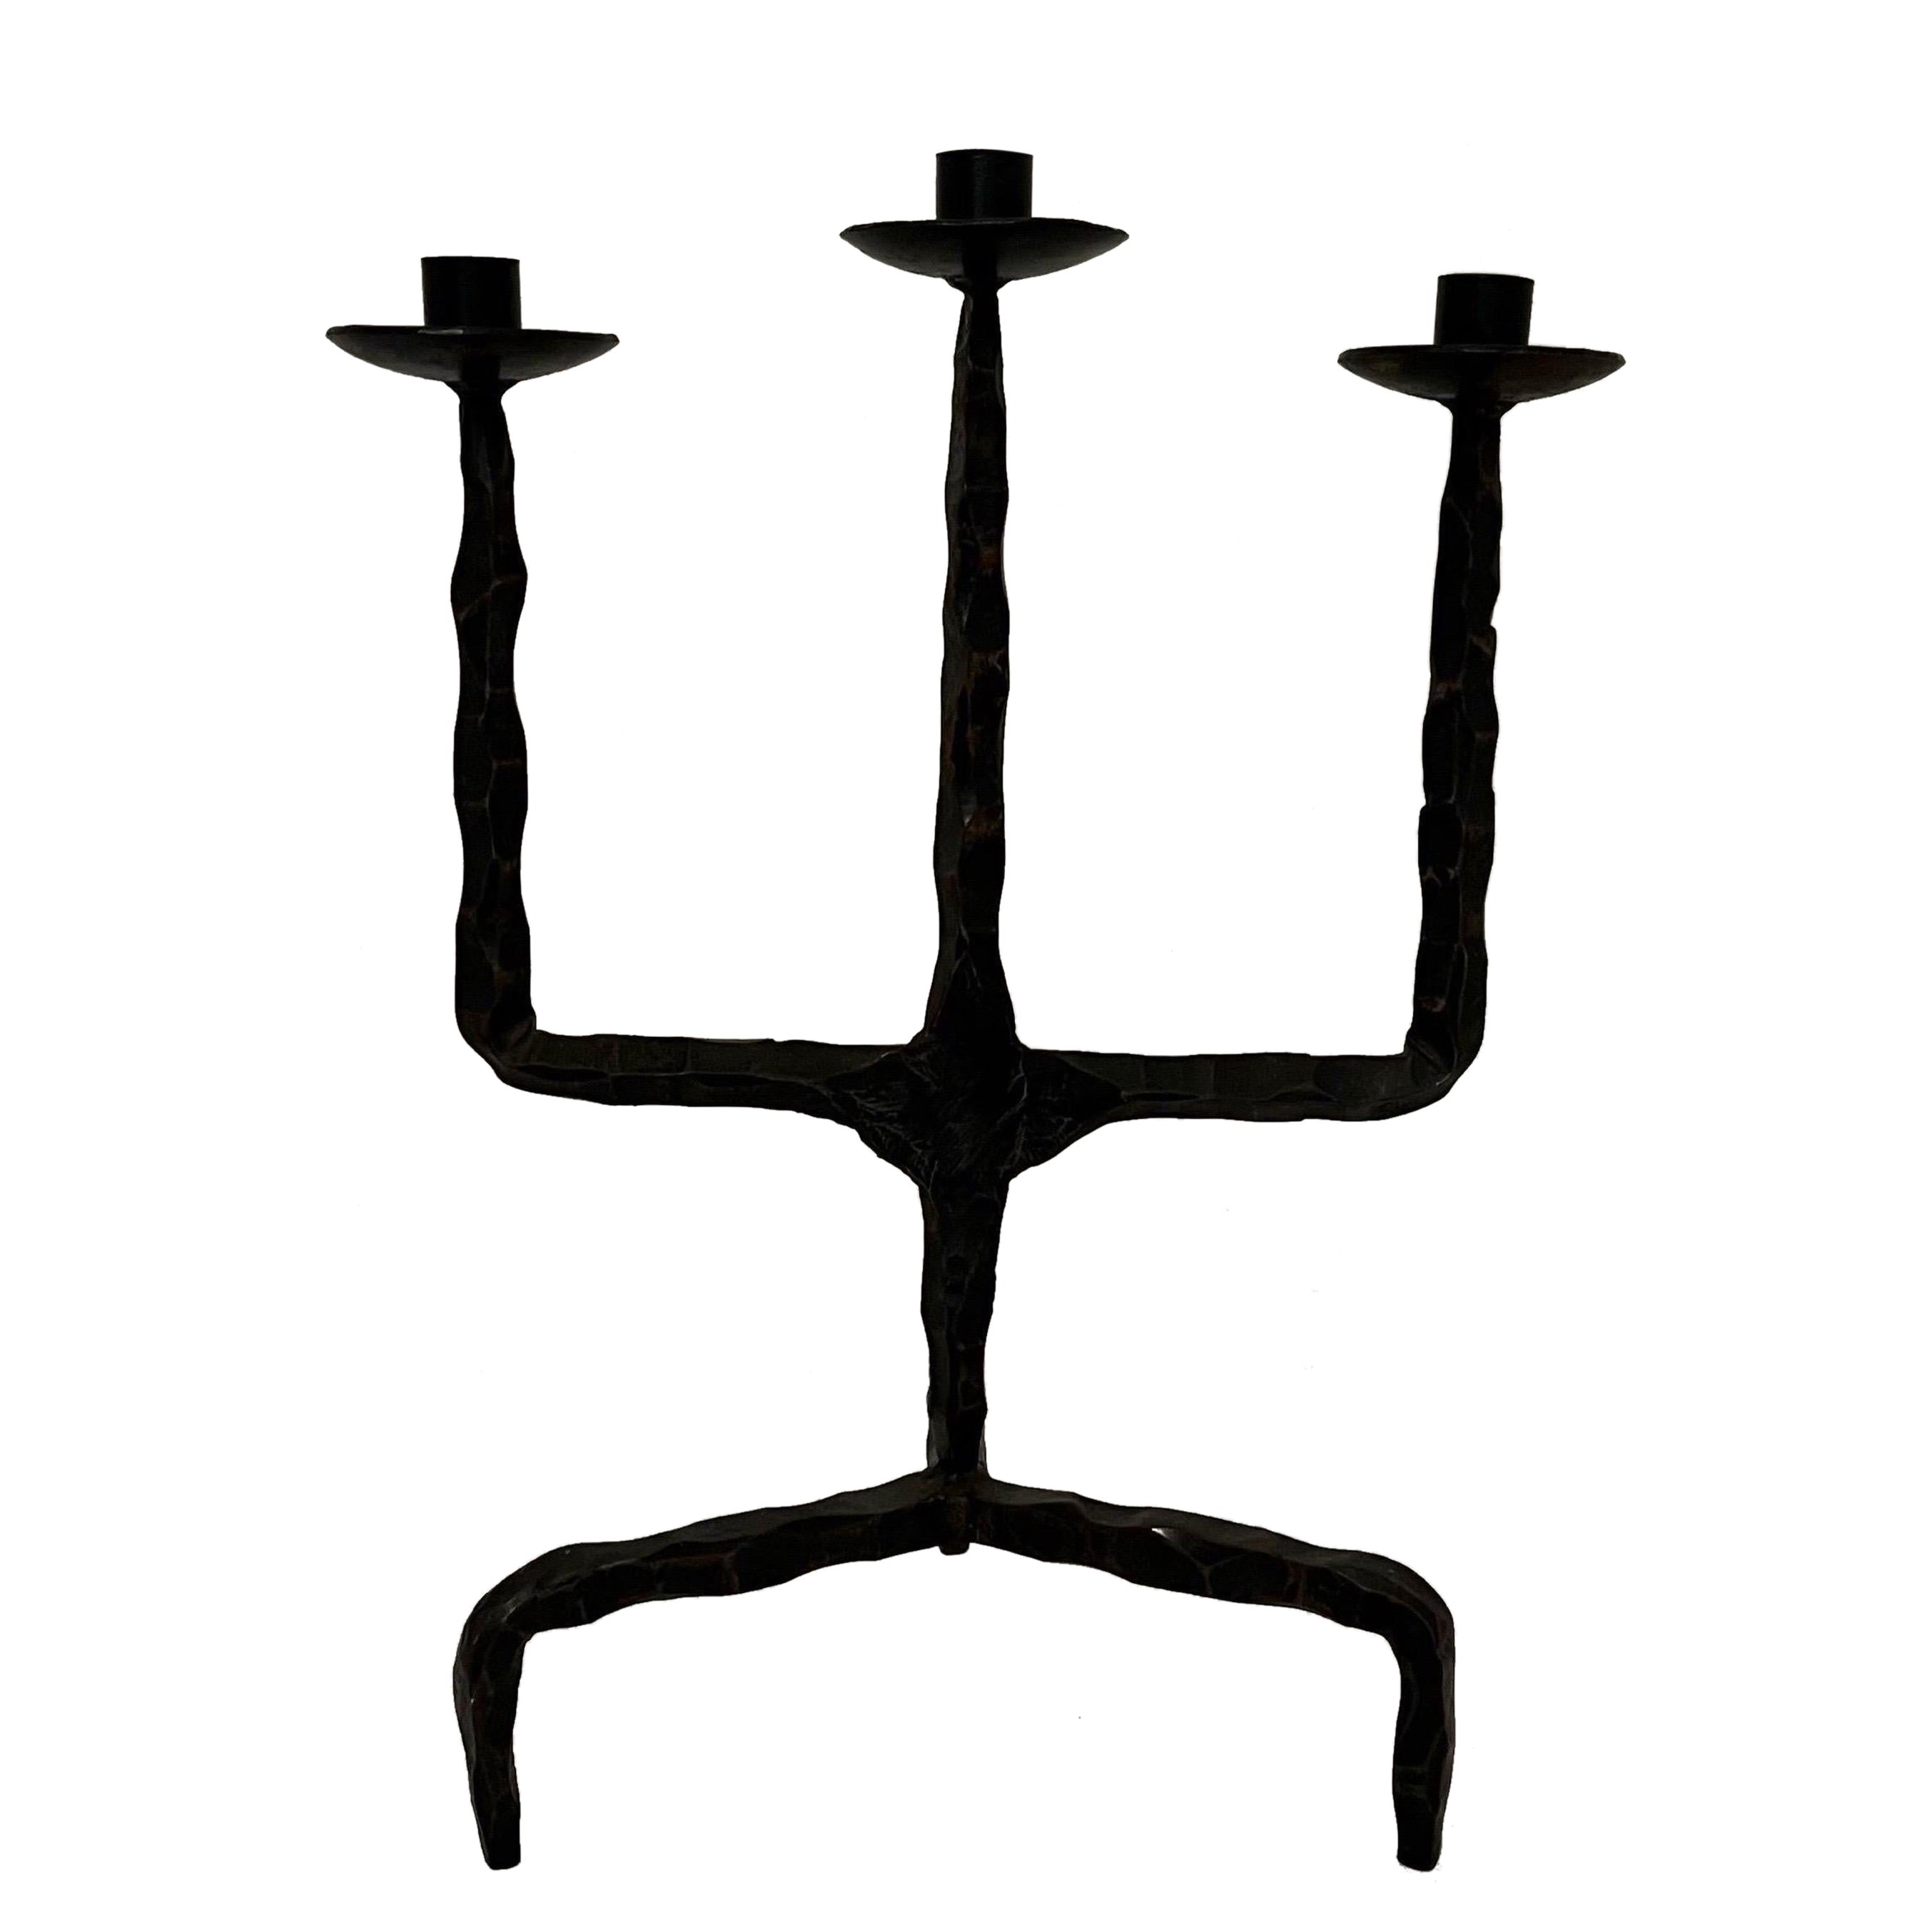 Brutalist French Iron candelabra candlestick - after Marolles c1950s For Sale